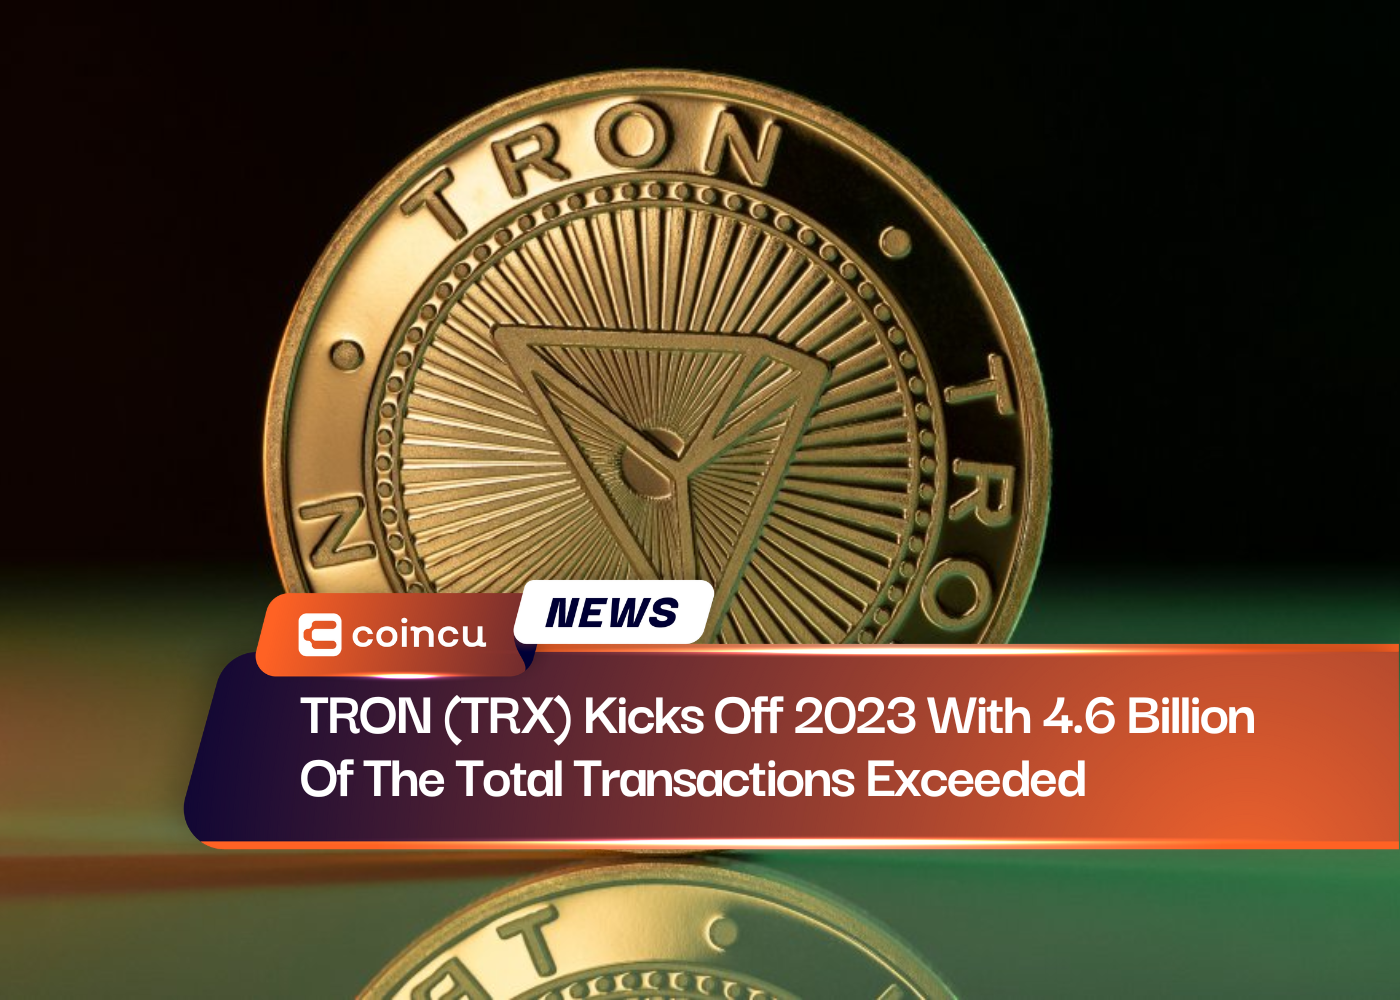 TRON (TRX) Kicks Off 2023 With 4.6 Billion Of The Total Transactions Exceeded